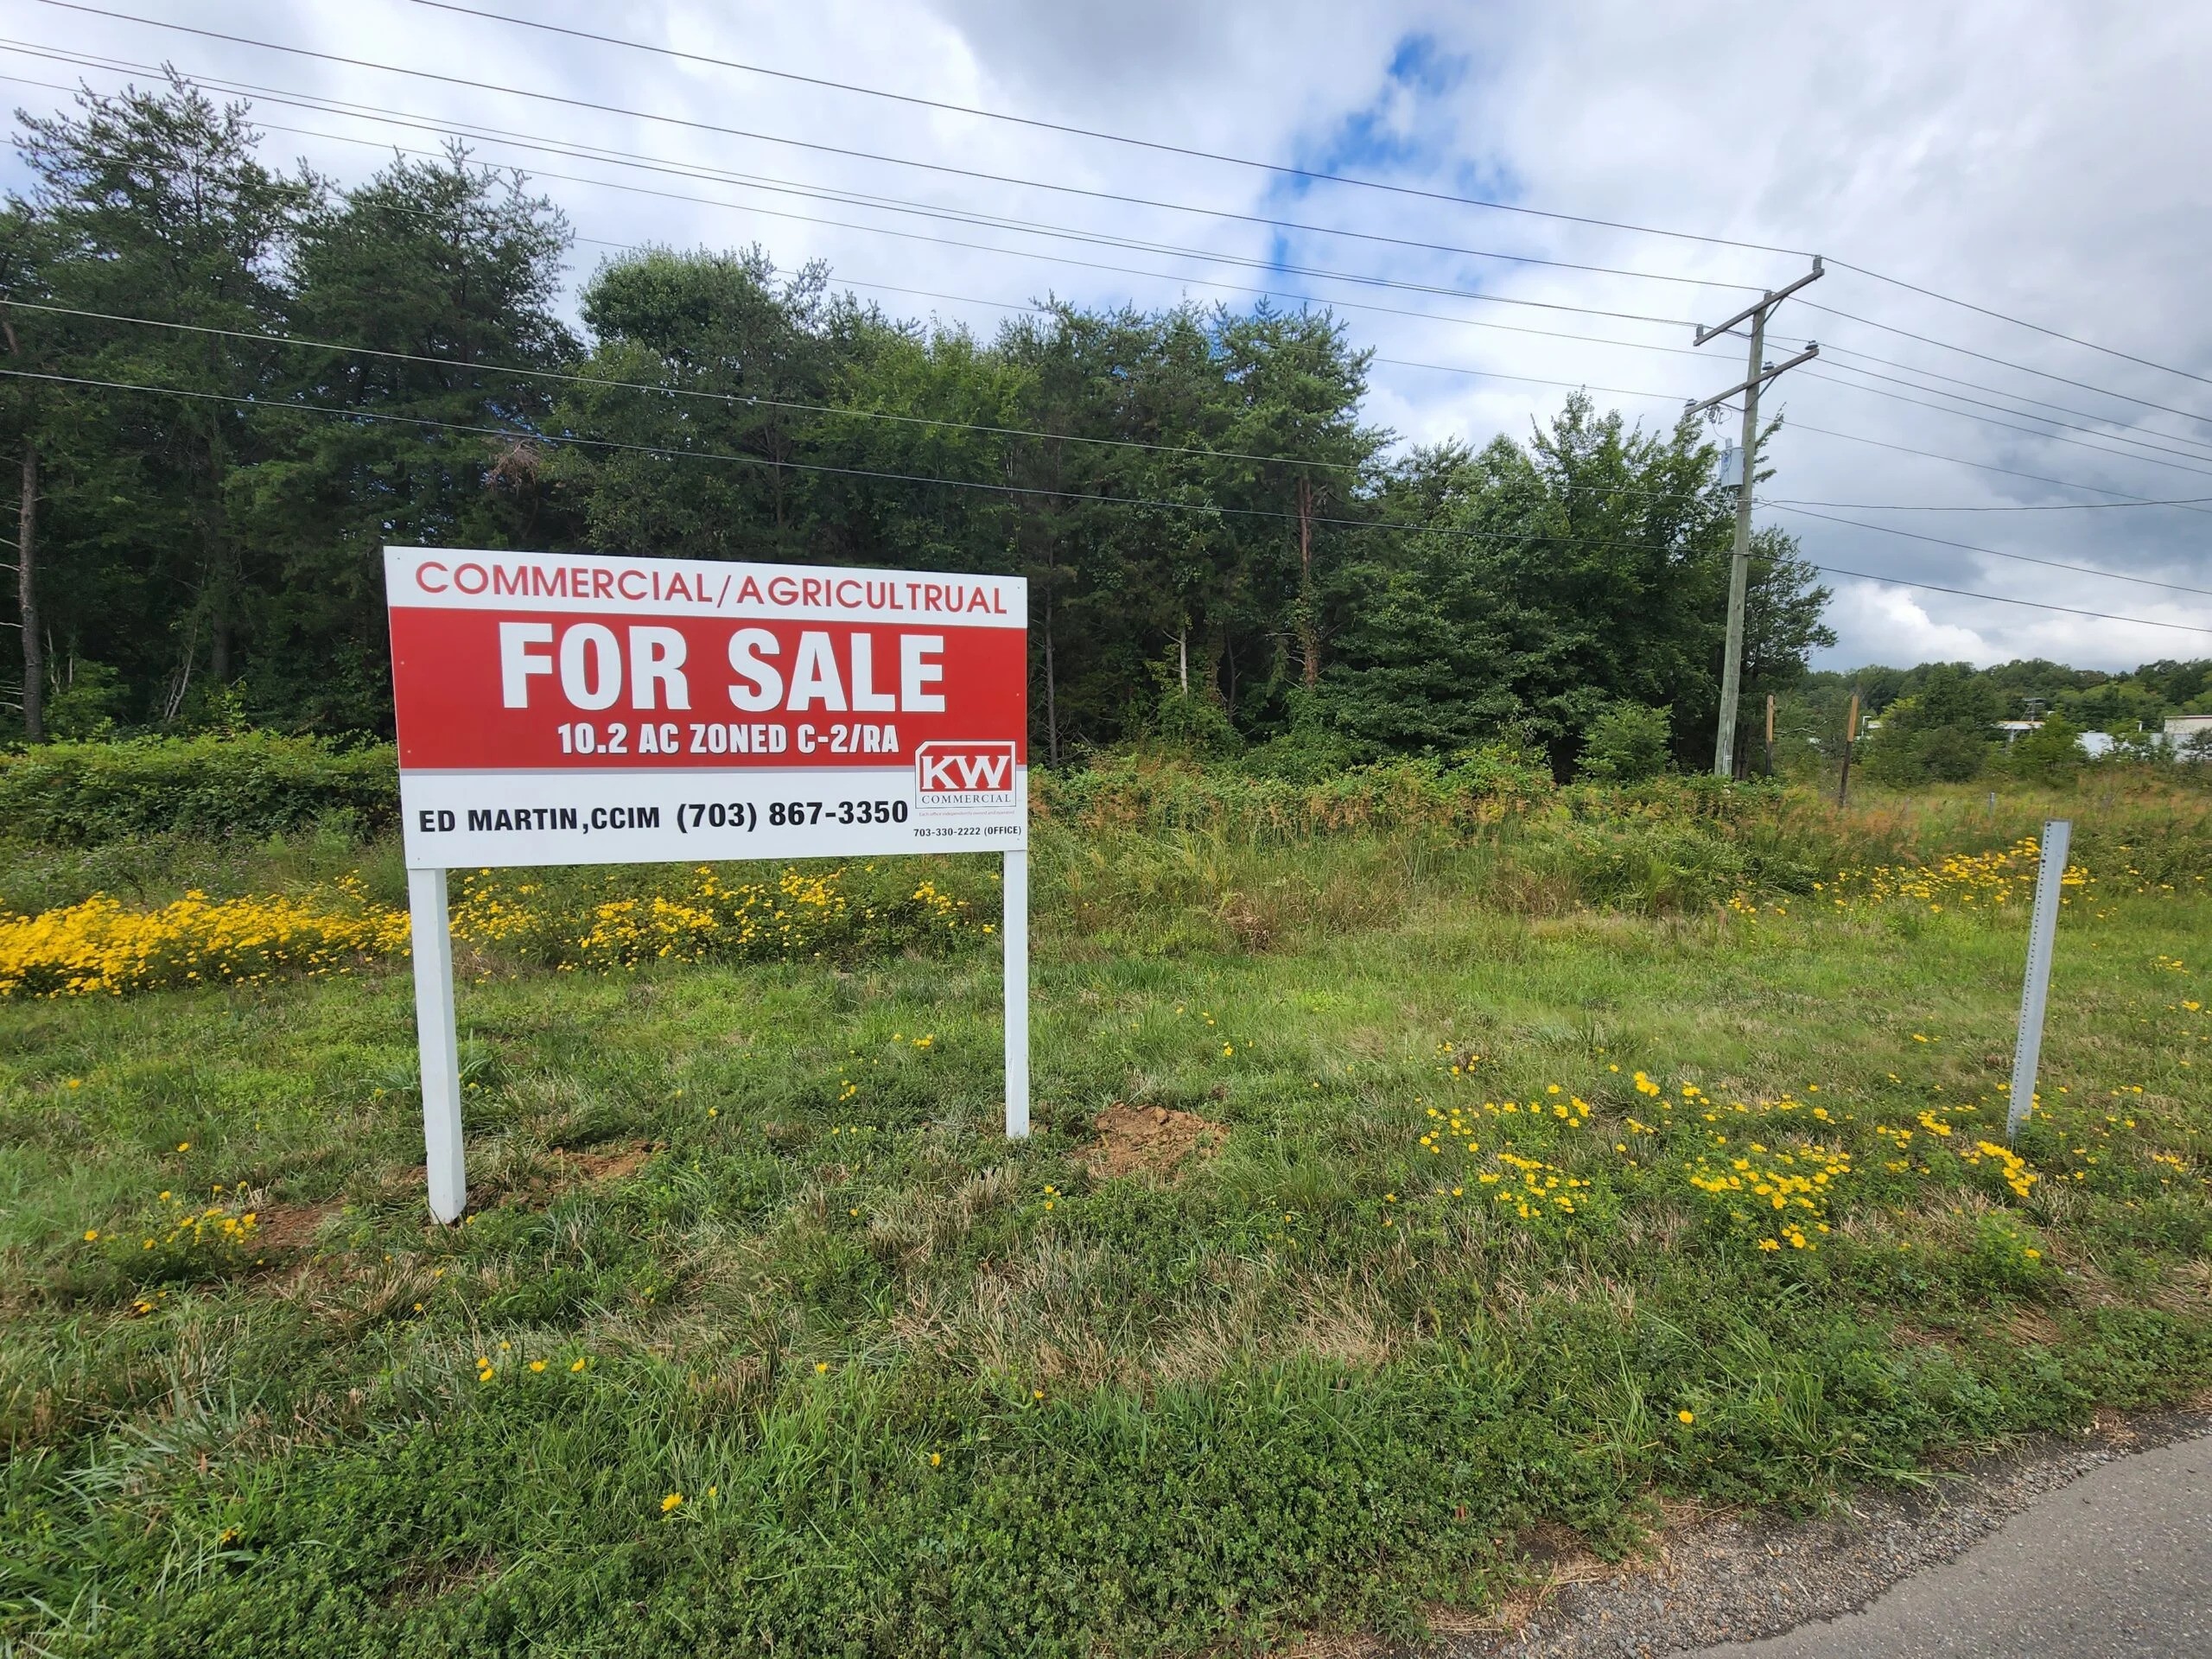 A red commercial real estate sign by Distinct Sign Solutions advertises land for sale in Fredericksburg, VA, with "Keller Williams" branding and contact details.